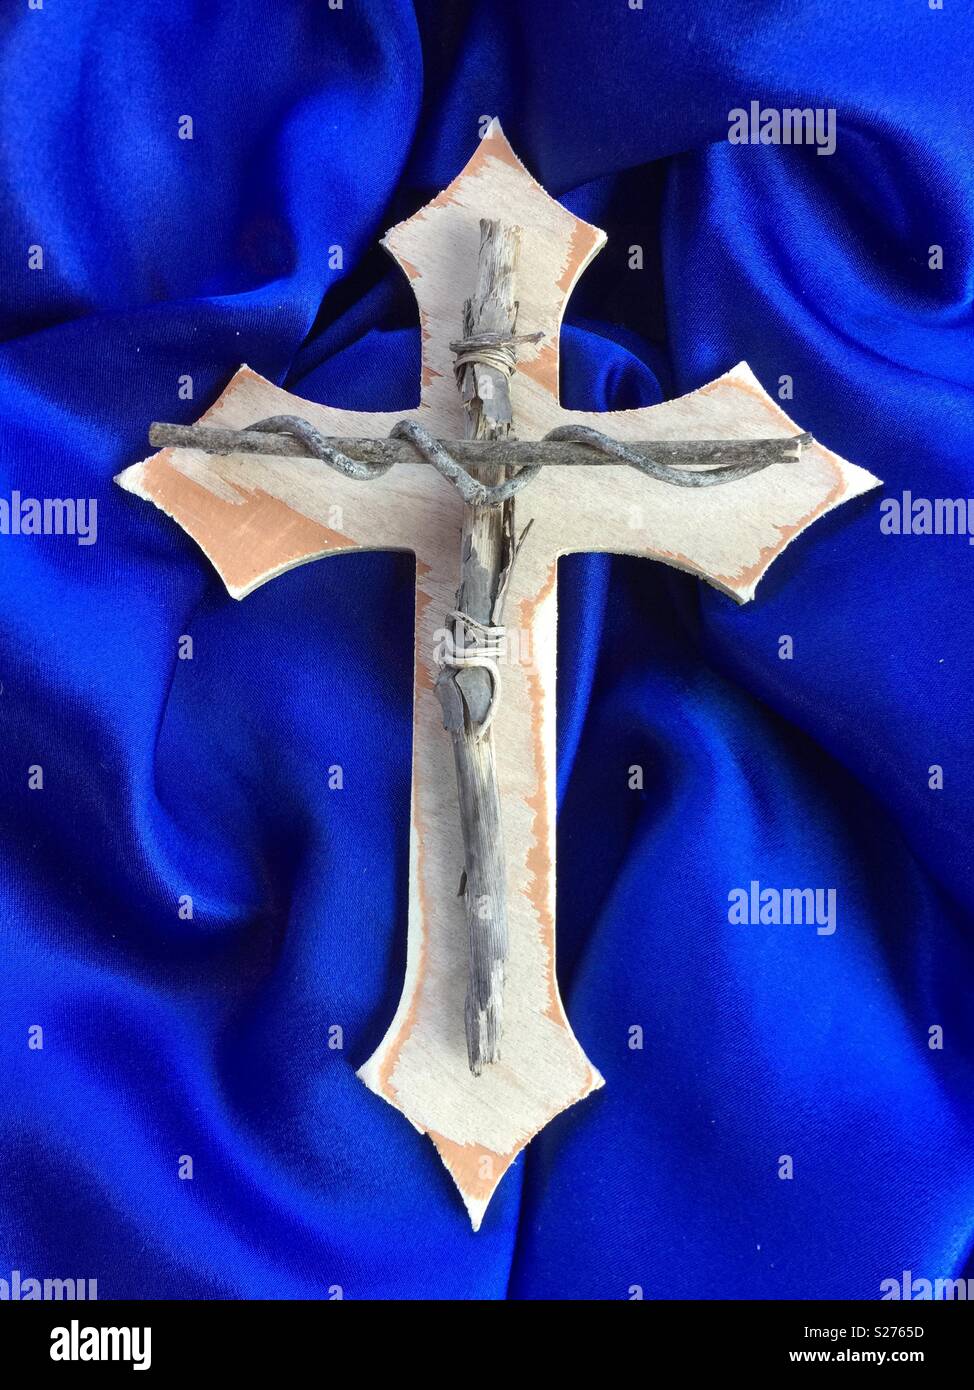 image identification - What is the name of this symbol that looks like a  double crucifix? - English Language & Usage Stack Exchange